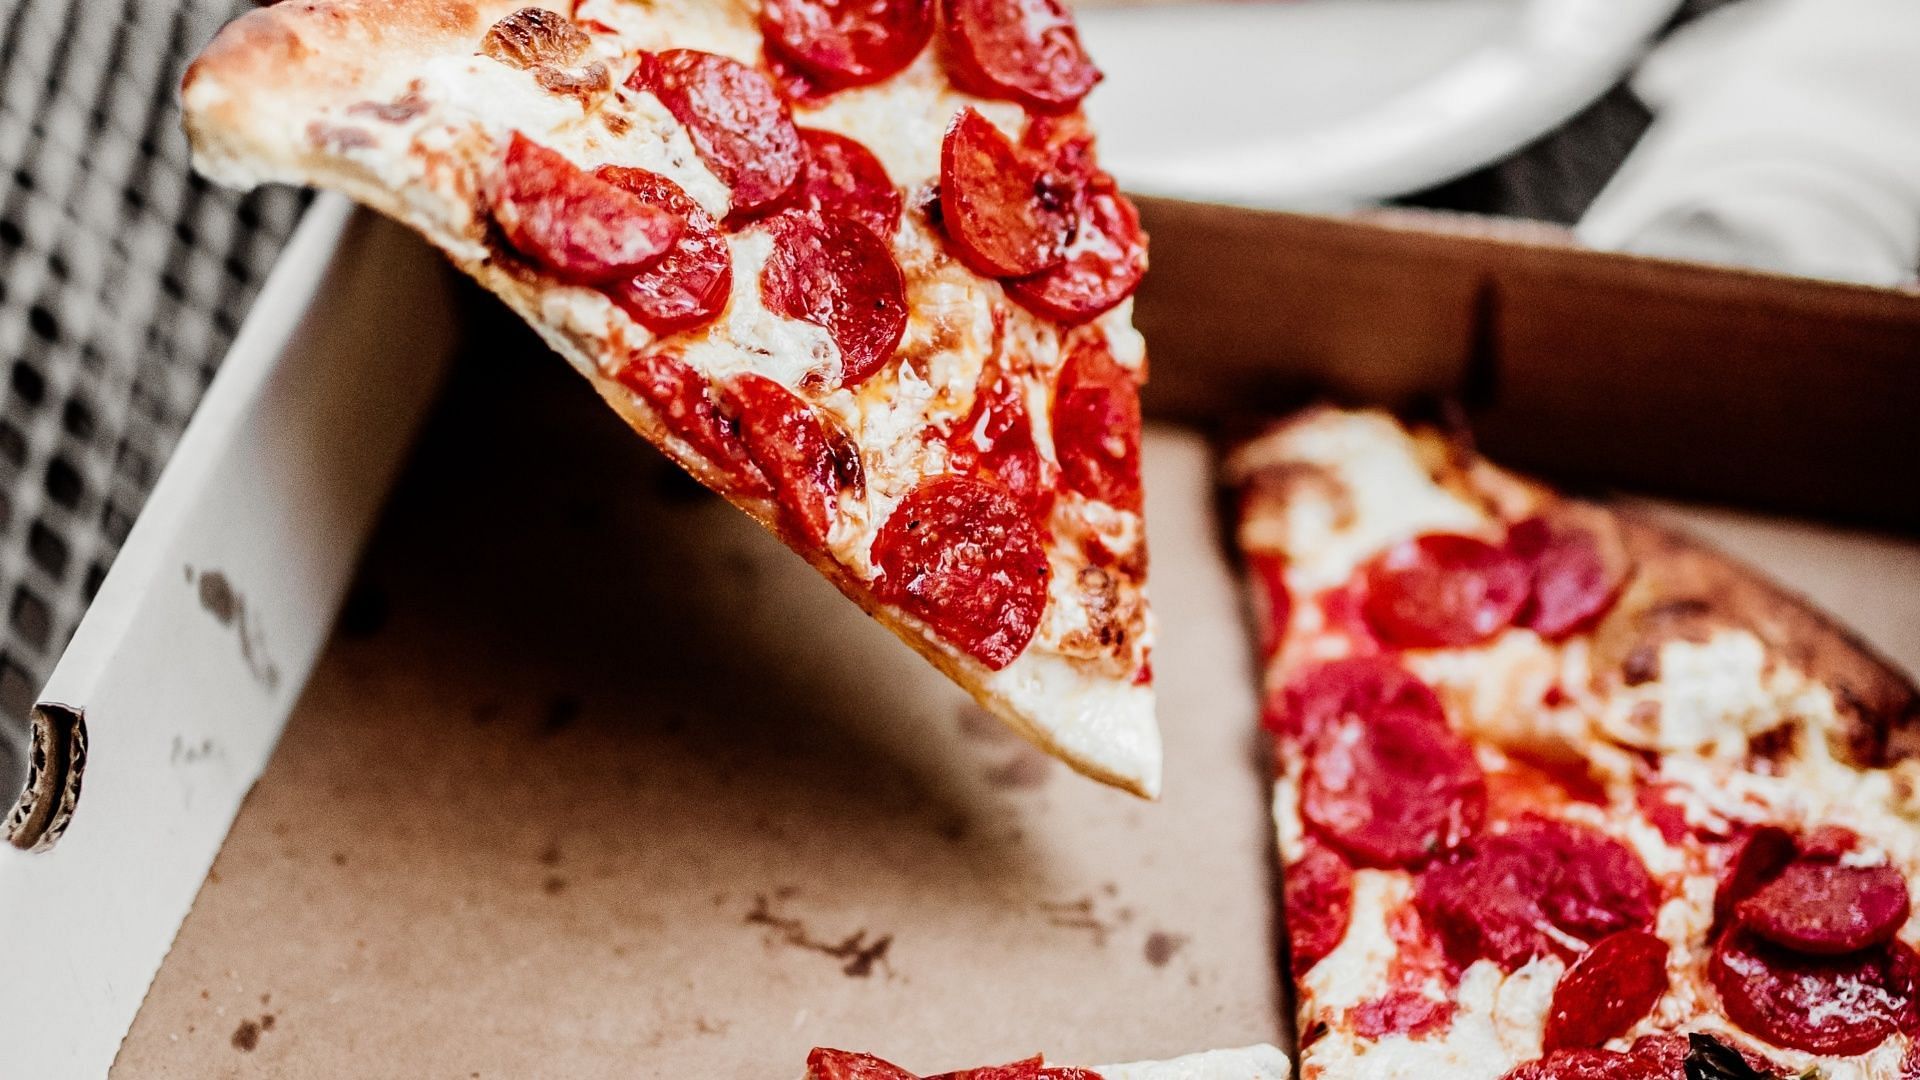 The new proposal is set to affect less than 100 pizzerias in New York City (Image via The Nix Company on Unsplash)